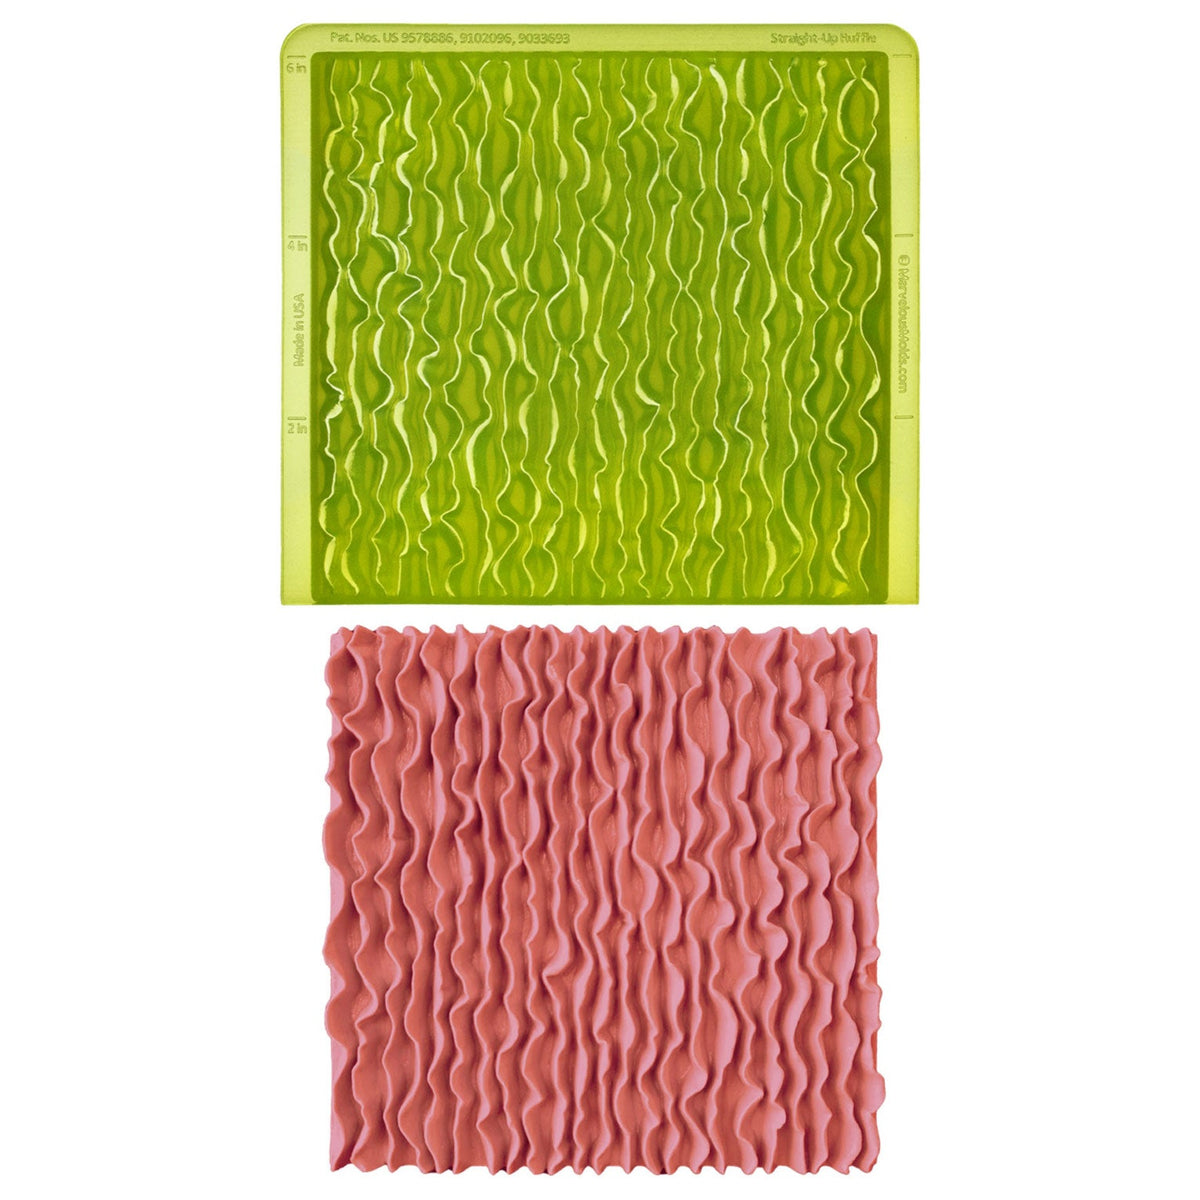 Straight Up Food Safe Silicone Simpress Mold for Fondant cake Decorating by Marvelous Molds